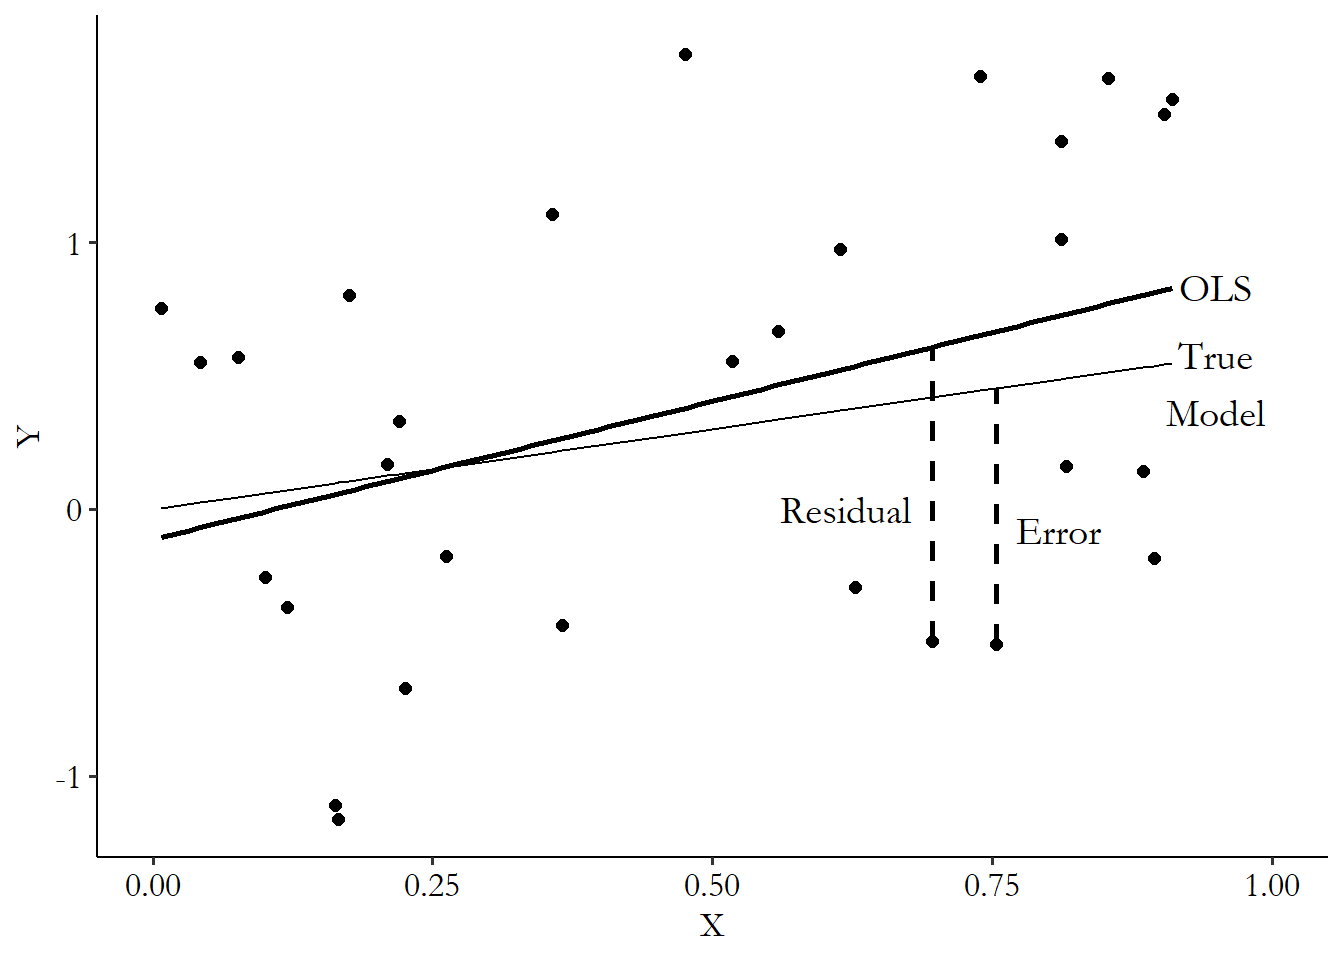 Graph showing a line representing the true data-generating process and an OLS fit line, and that the residual is the vertical distance from a point to the OLS line, while the error is the vertical distance from a point to hte true data-generating process line.